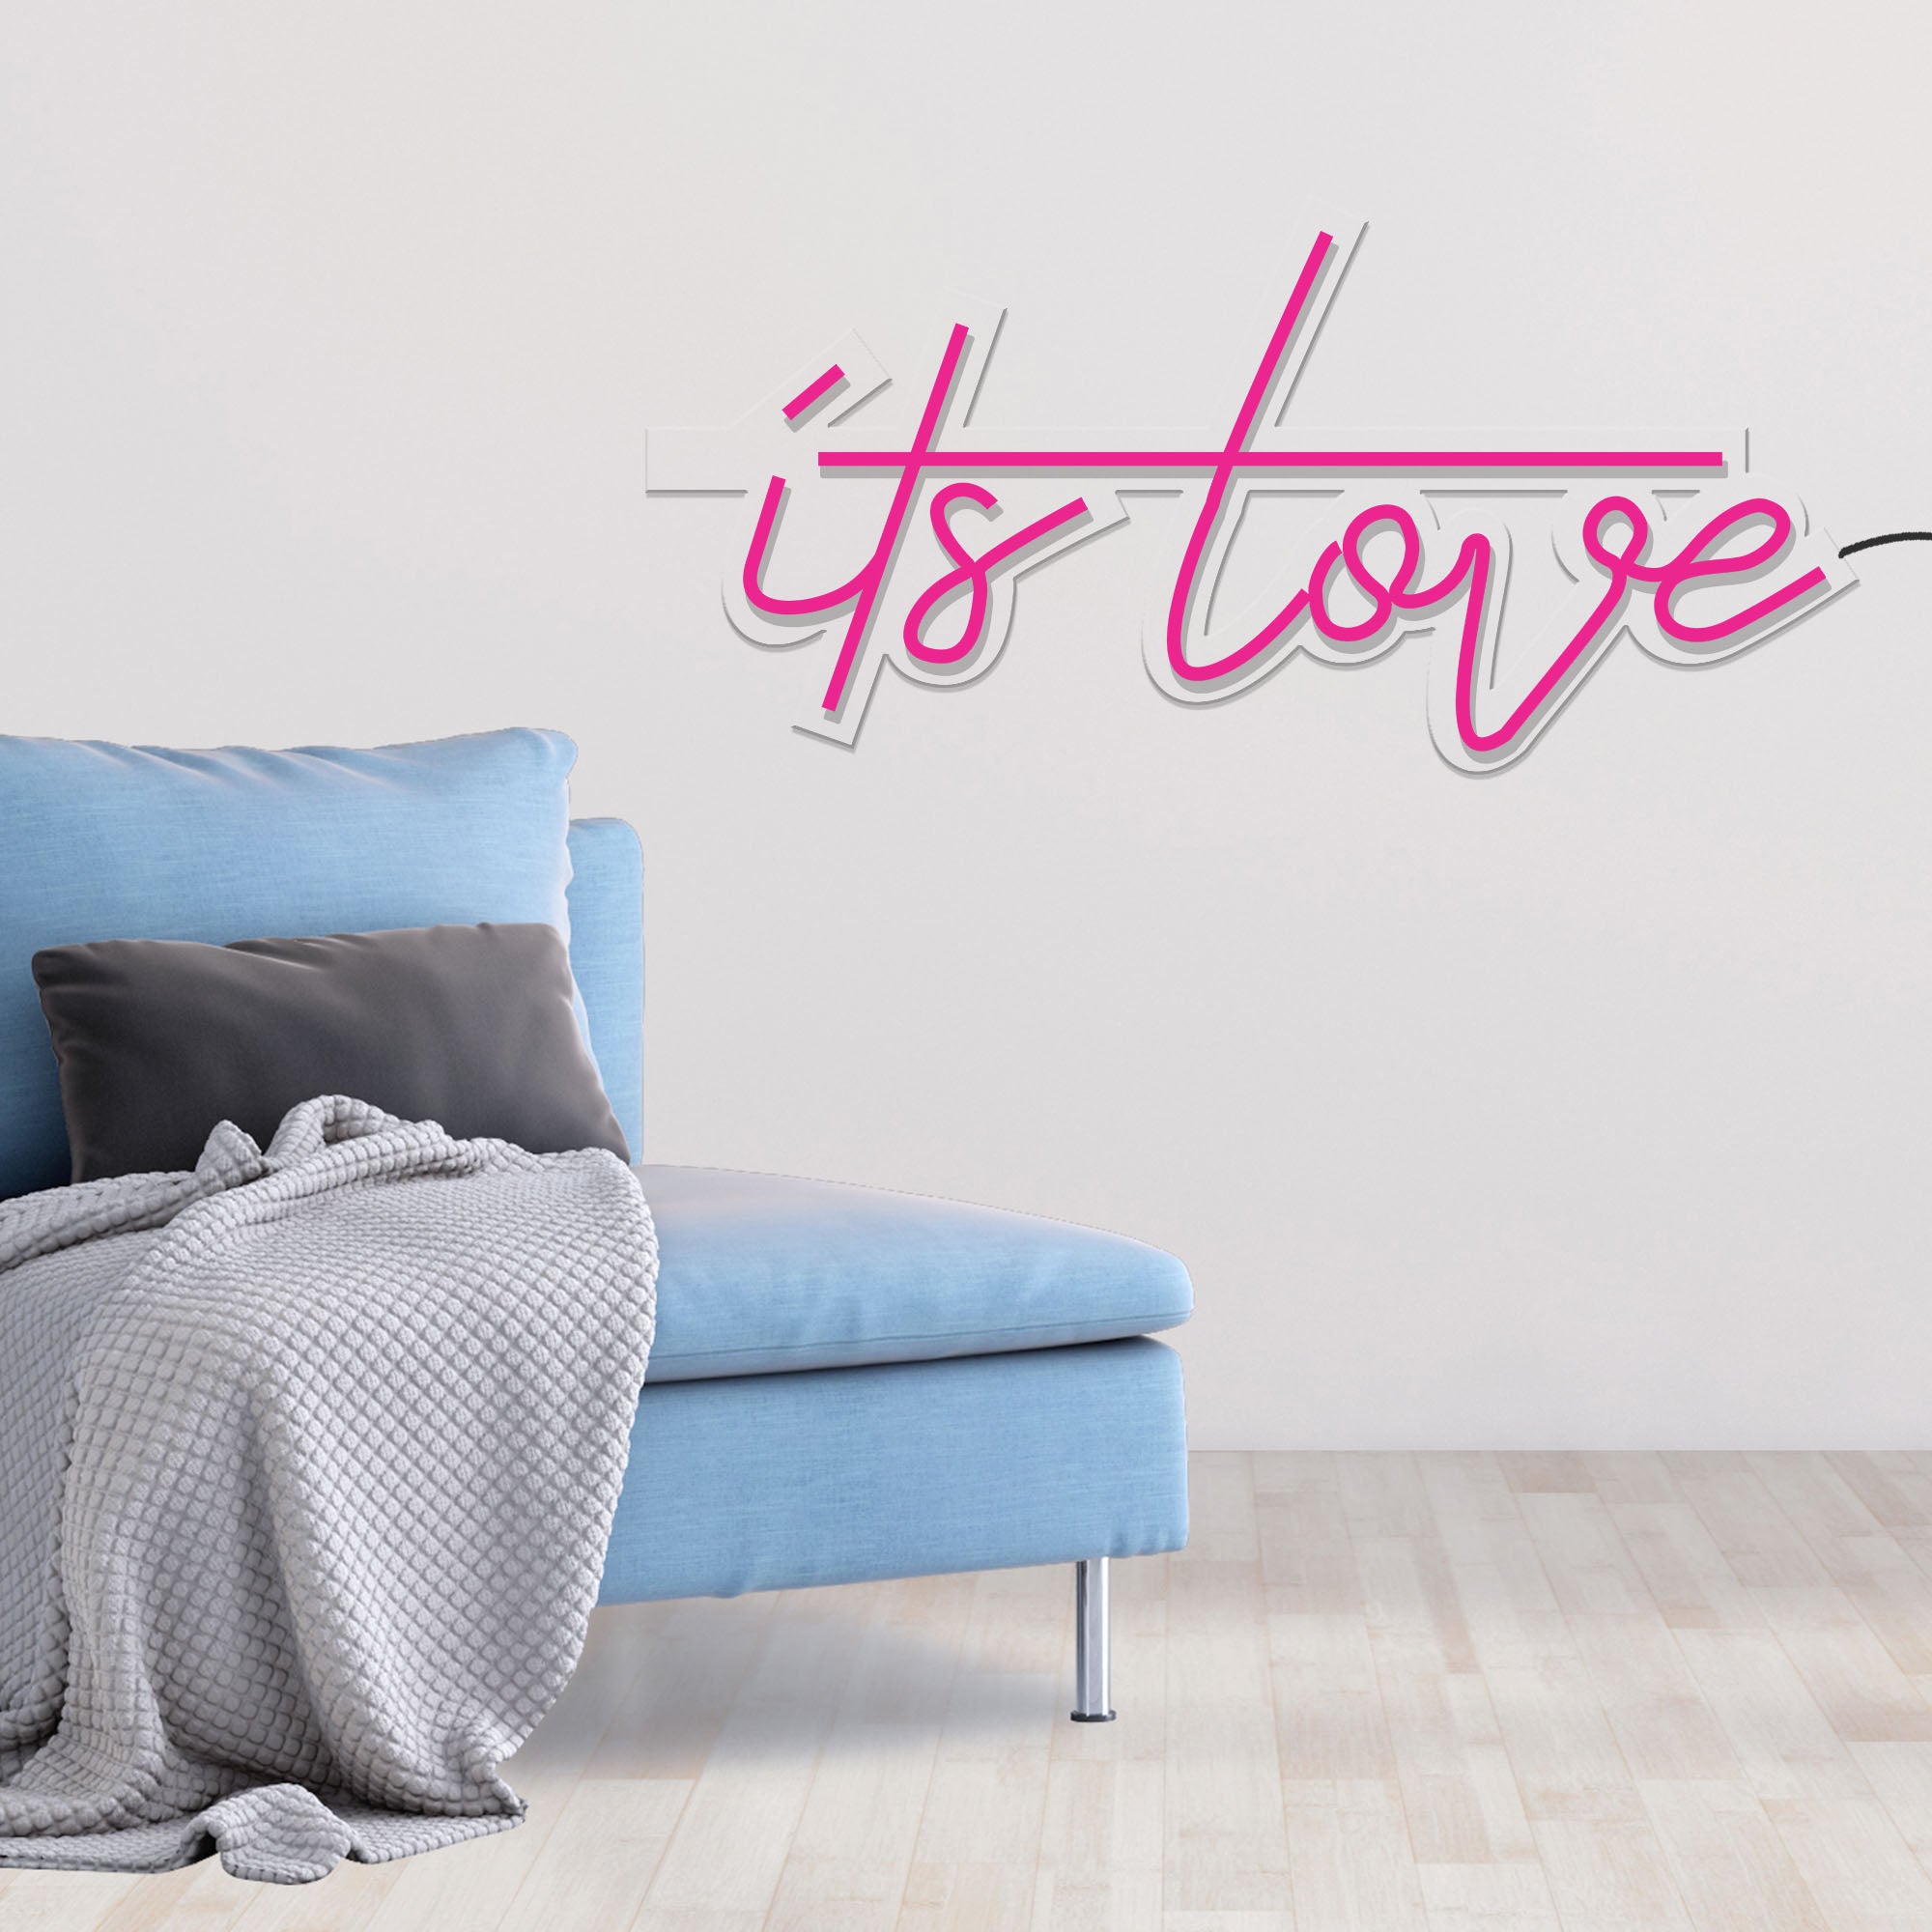 "Its Love" Couple Text Neon Sign LED Light